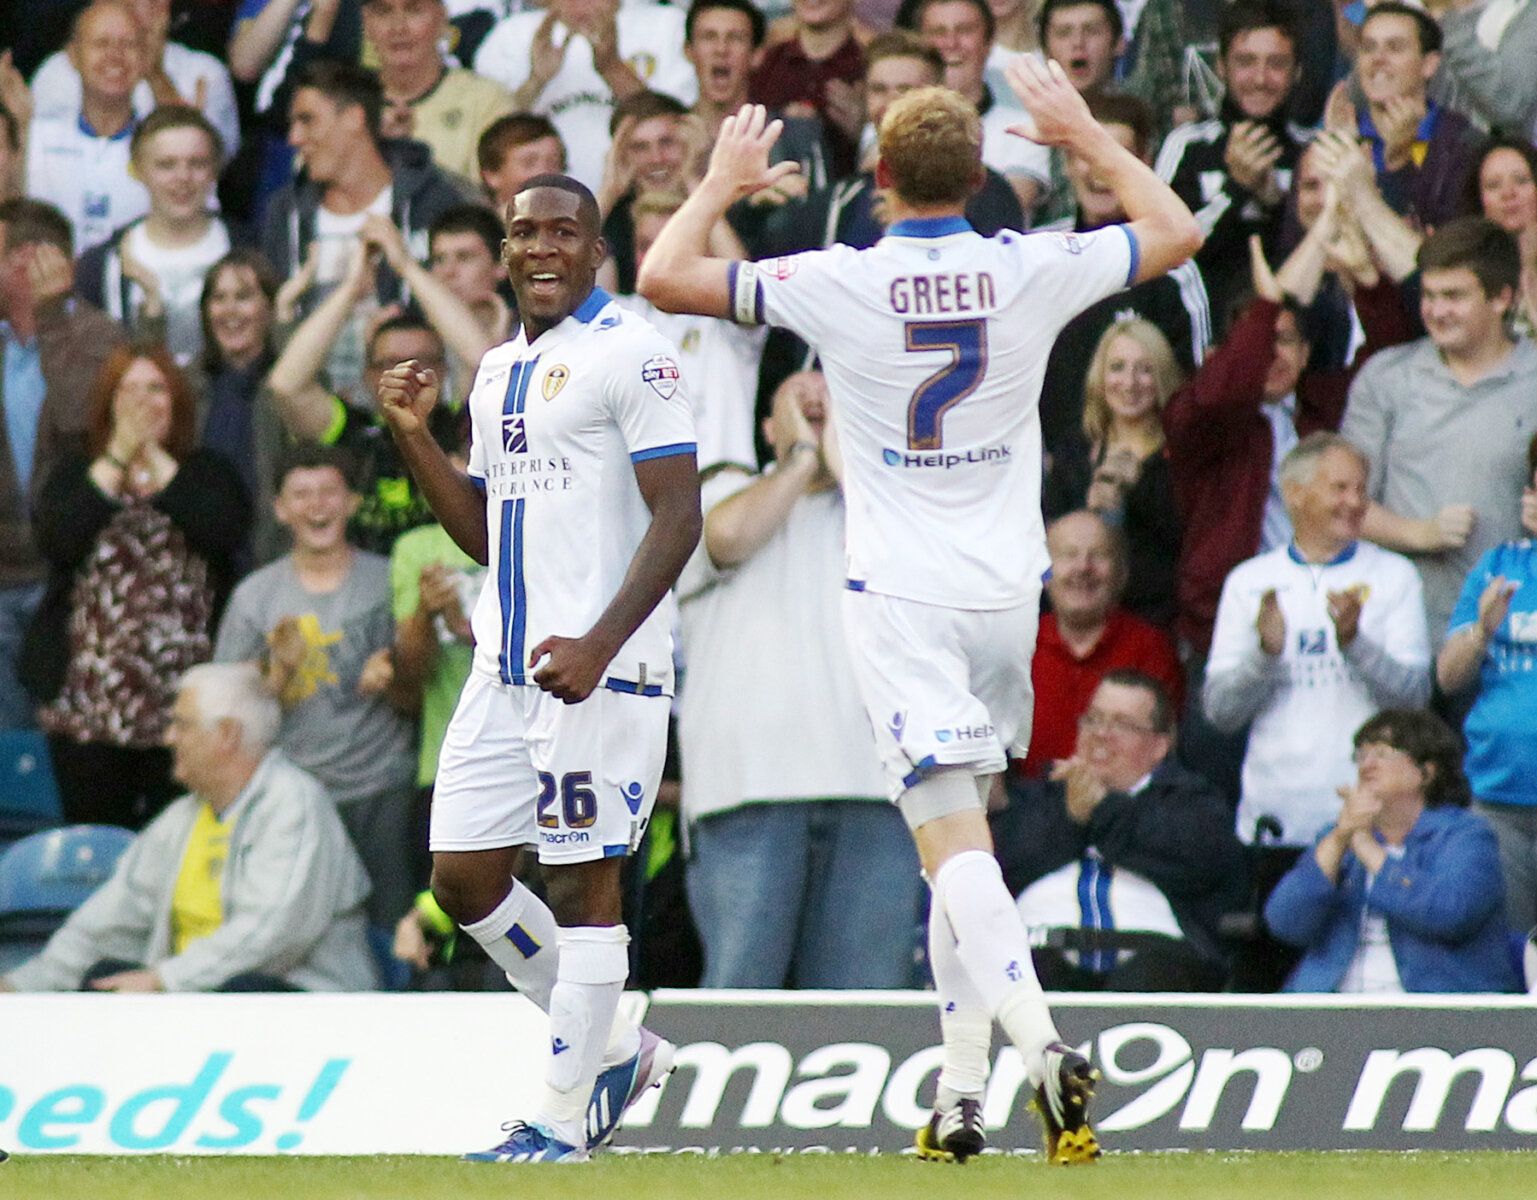 Football - Leeds United v Chesterfield - Capital One Cup First Round - Elland Road - 7/8/13 
Dominic Poleon (L) celebrates after scoring the second goal for Leeds United 
Mandatory Credit: Action Images / Ed Sykes 
Livepic 
EDITORIAL USE ONLY 
No use with unauthorized audio, video, data, fixture lists, club/league logos or live services. Online in-match use limited to 45 images, no video emulation. No use in betting, games or single club/league/player publications.  Please contact your account r